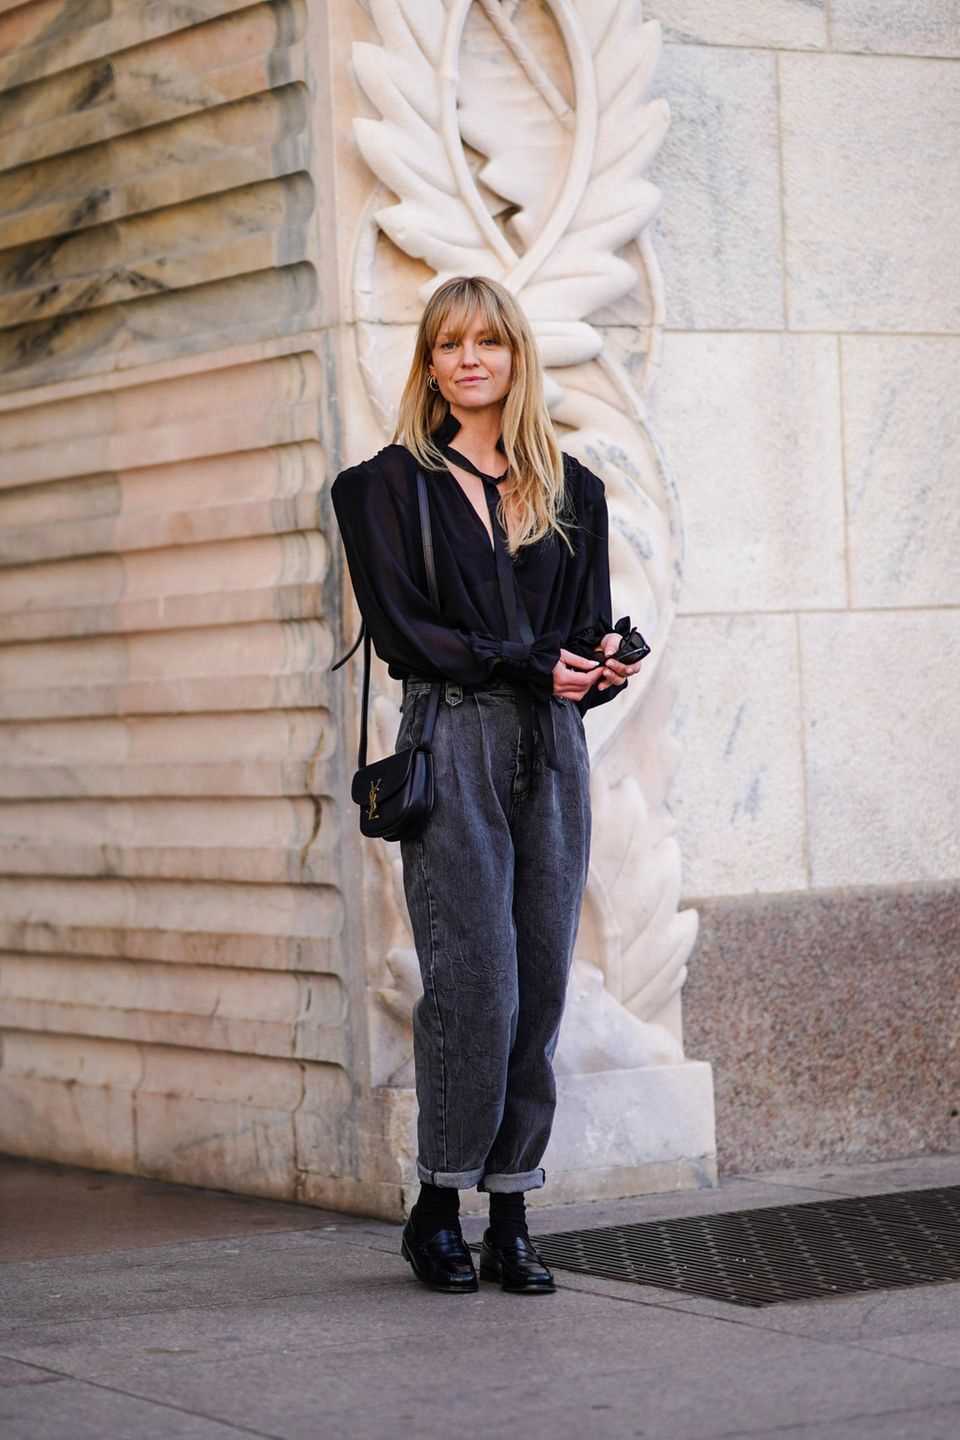 Designer Jeanette Madsen also knows how to wear pleated jeans.  In dark gray, the trousers look a bit more chic and, in combination with a beautiful blouse, become a real eye-catcher.  